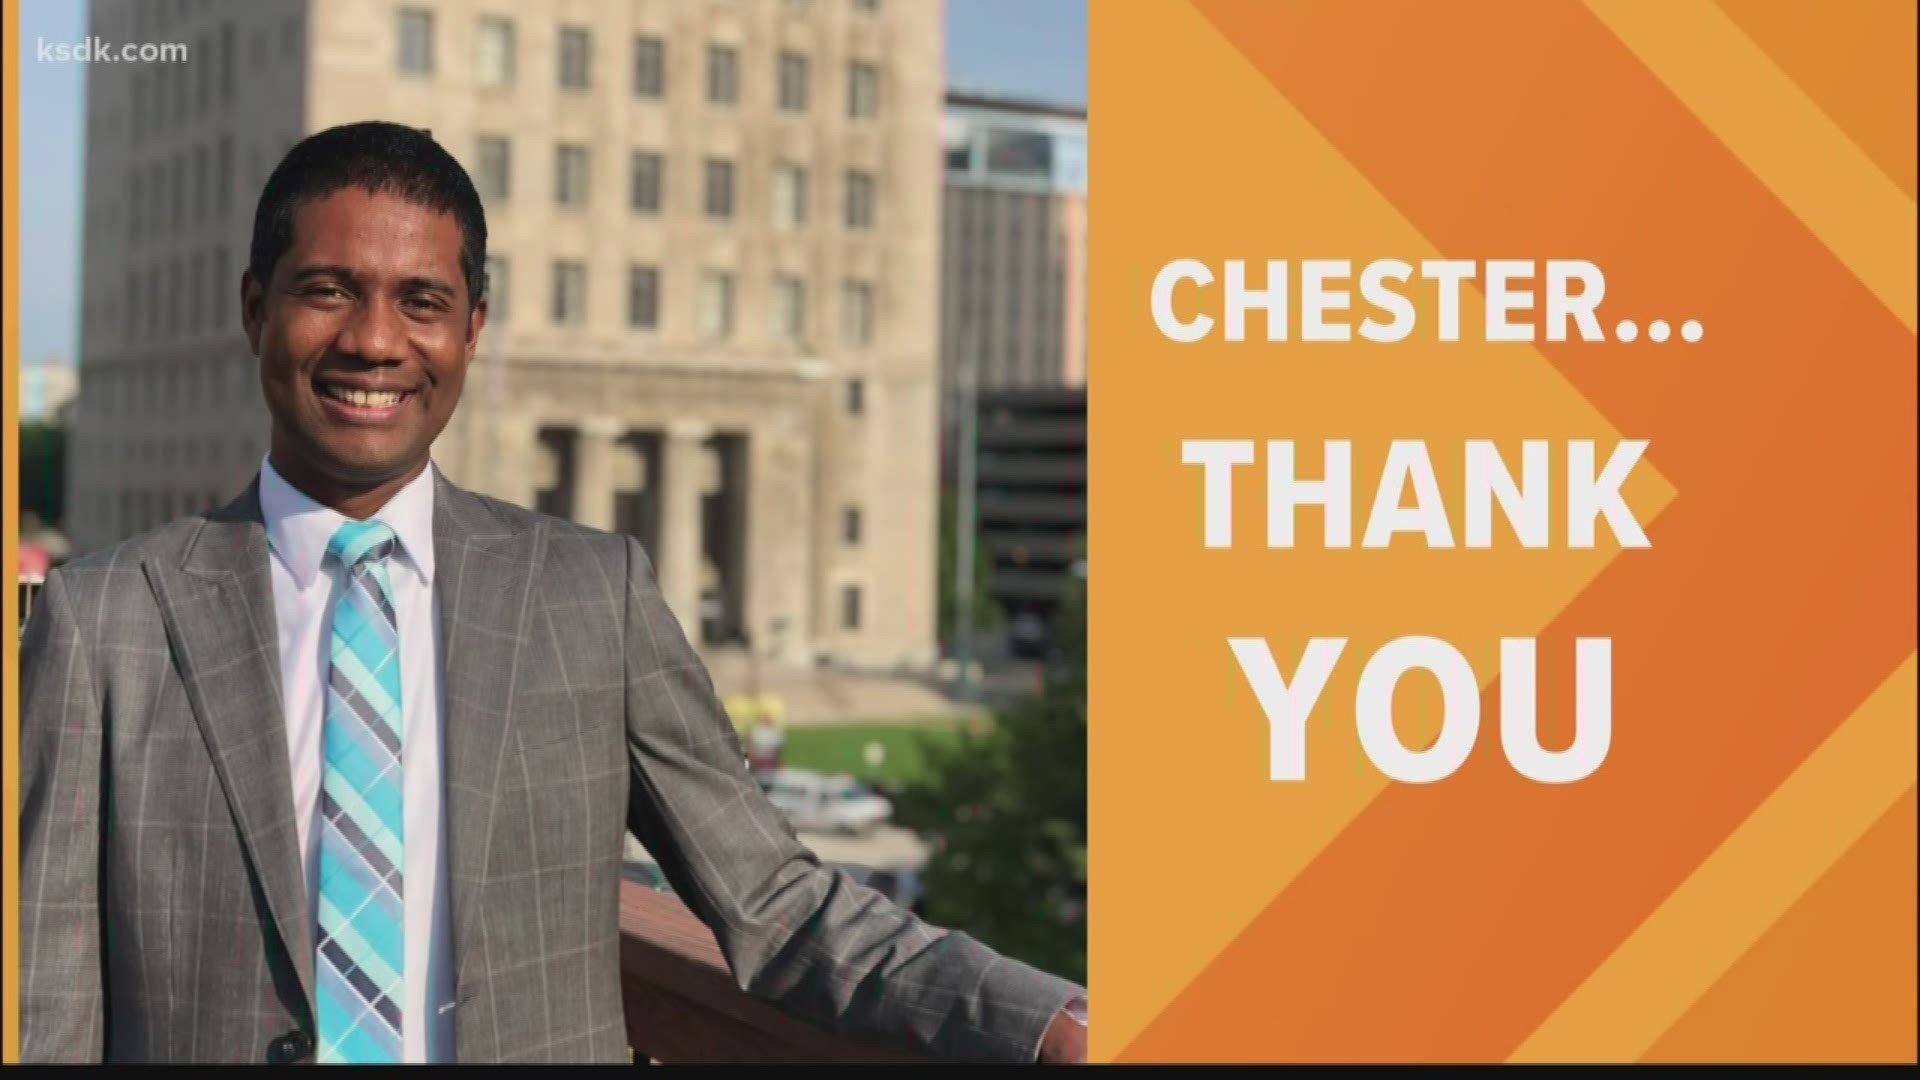 It's meteorologist Chester Lampkin's last week on TISL. He will be working for our sister station in Washington D.C.